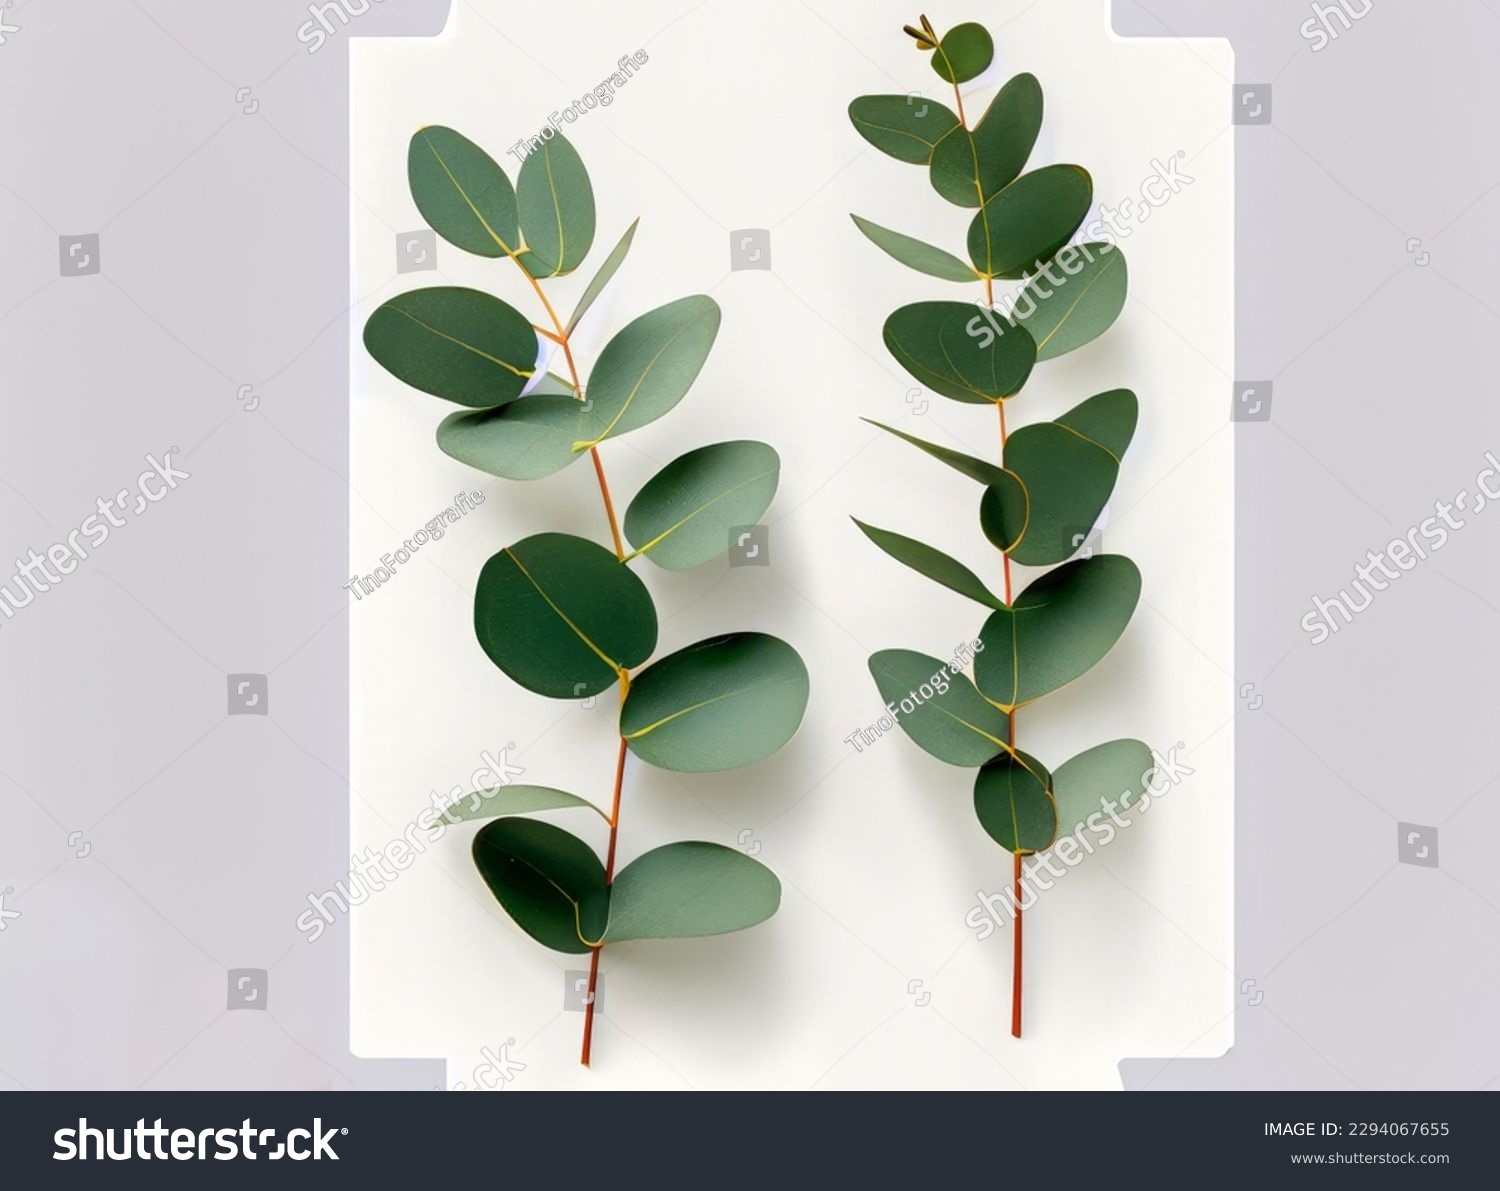 two eucalyptus twigs isolated over white background, natural design elements or props for flatlays and digital floristry, top view . High quality photo #2294067655